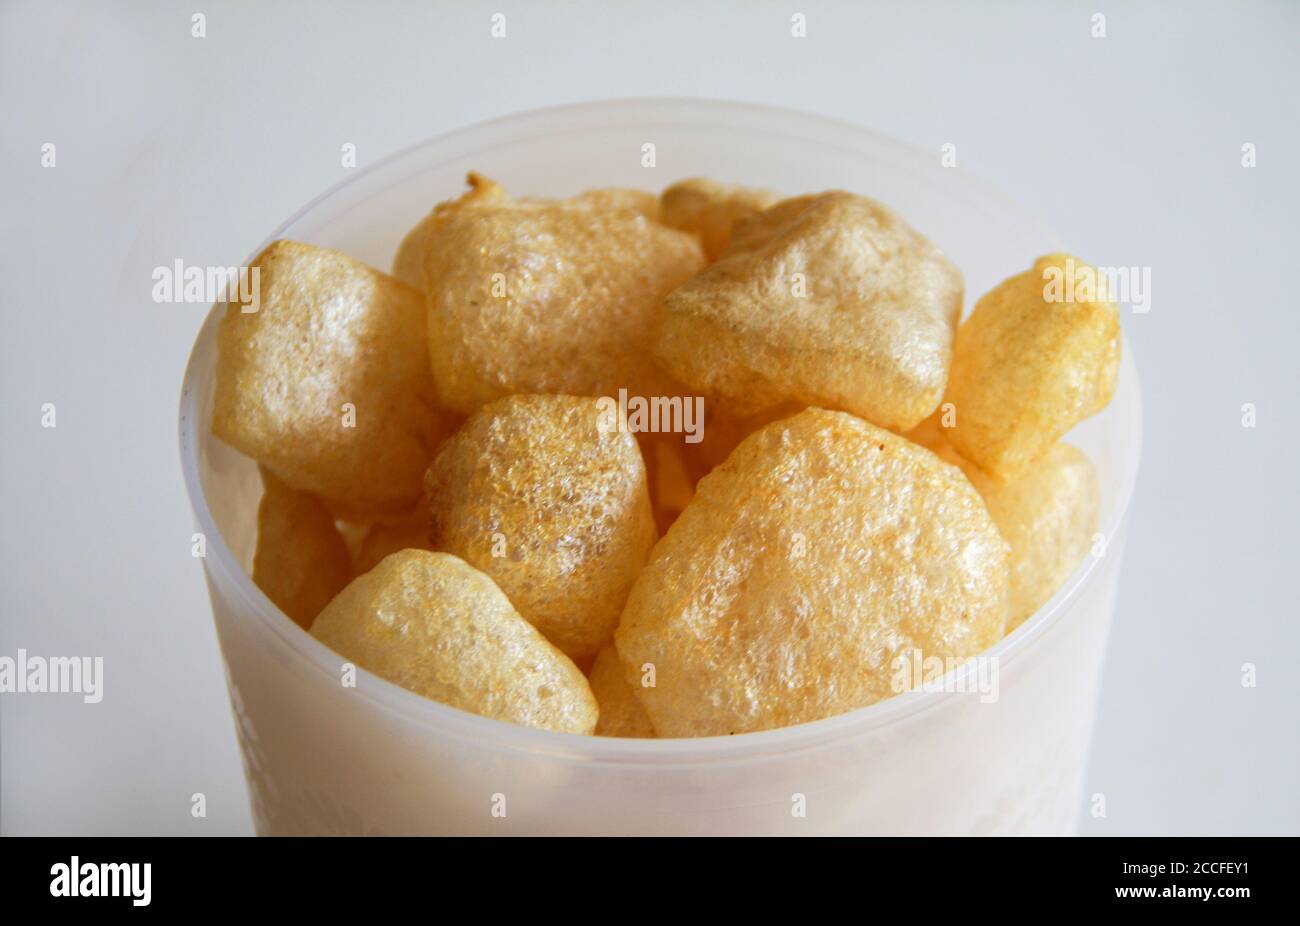 Cattle skin crackers on white background. Stock Photo